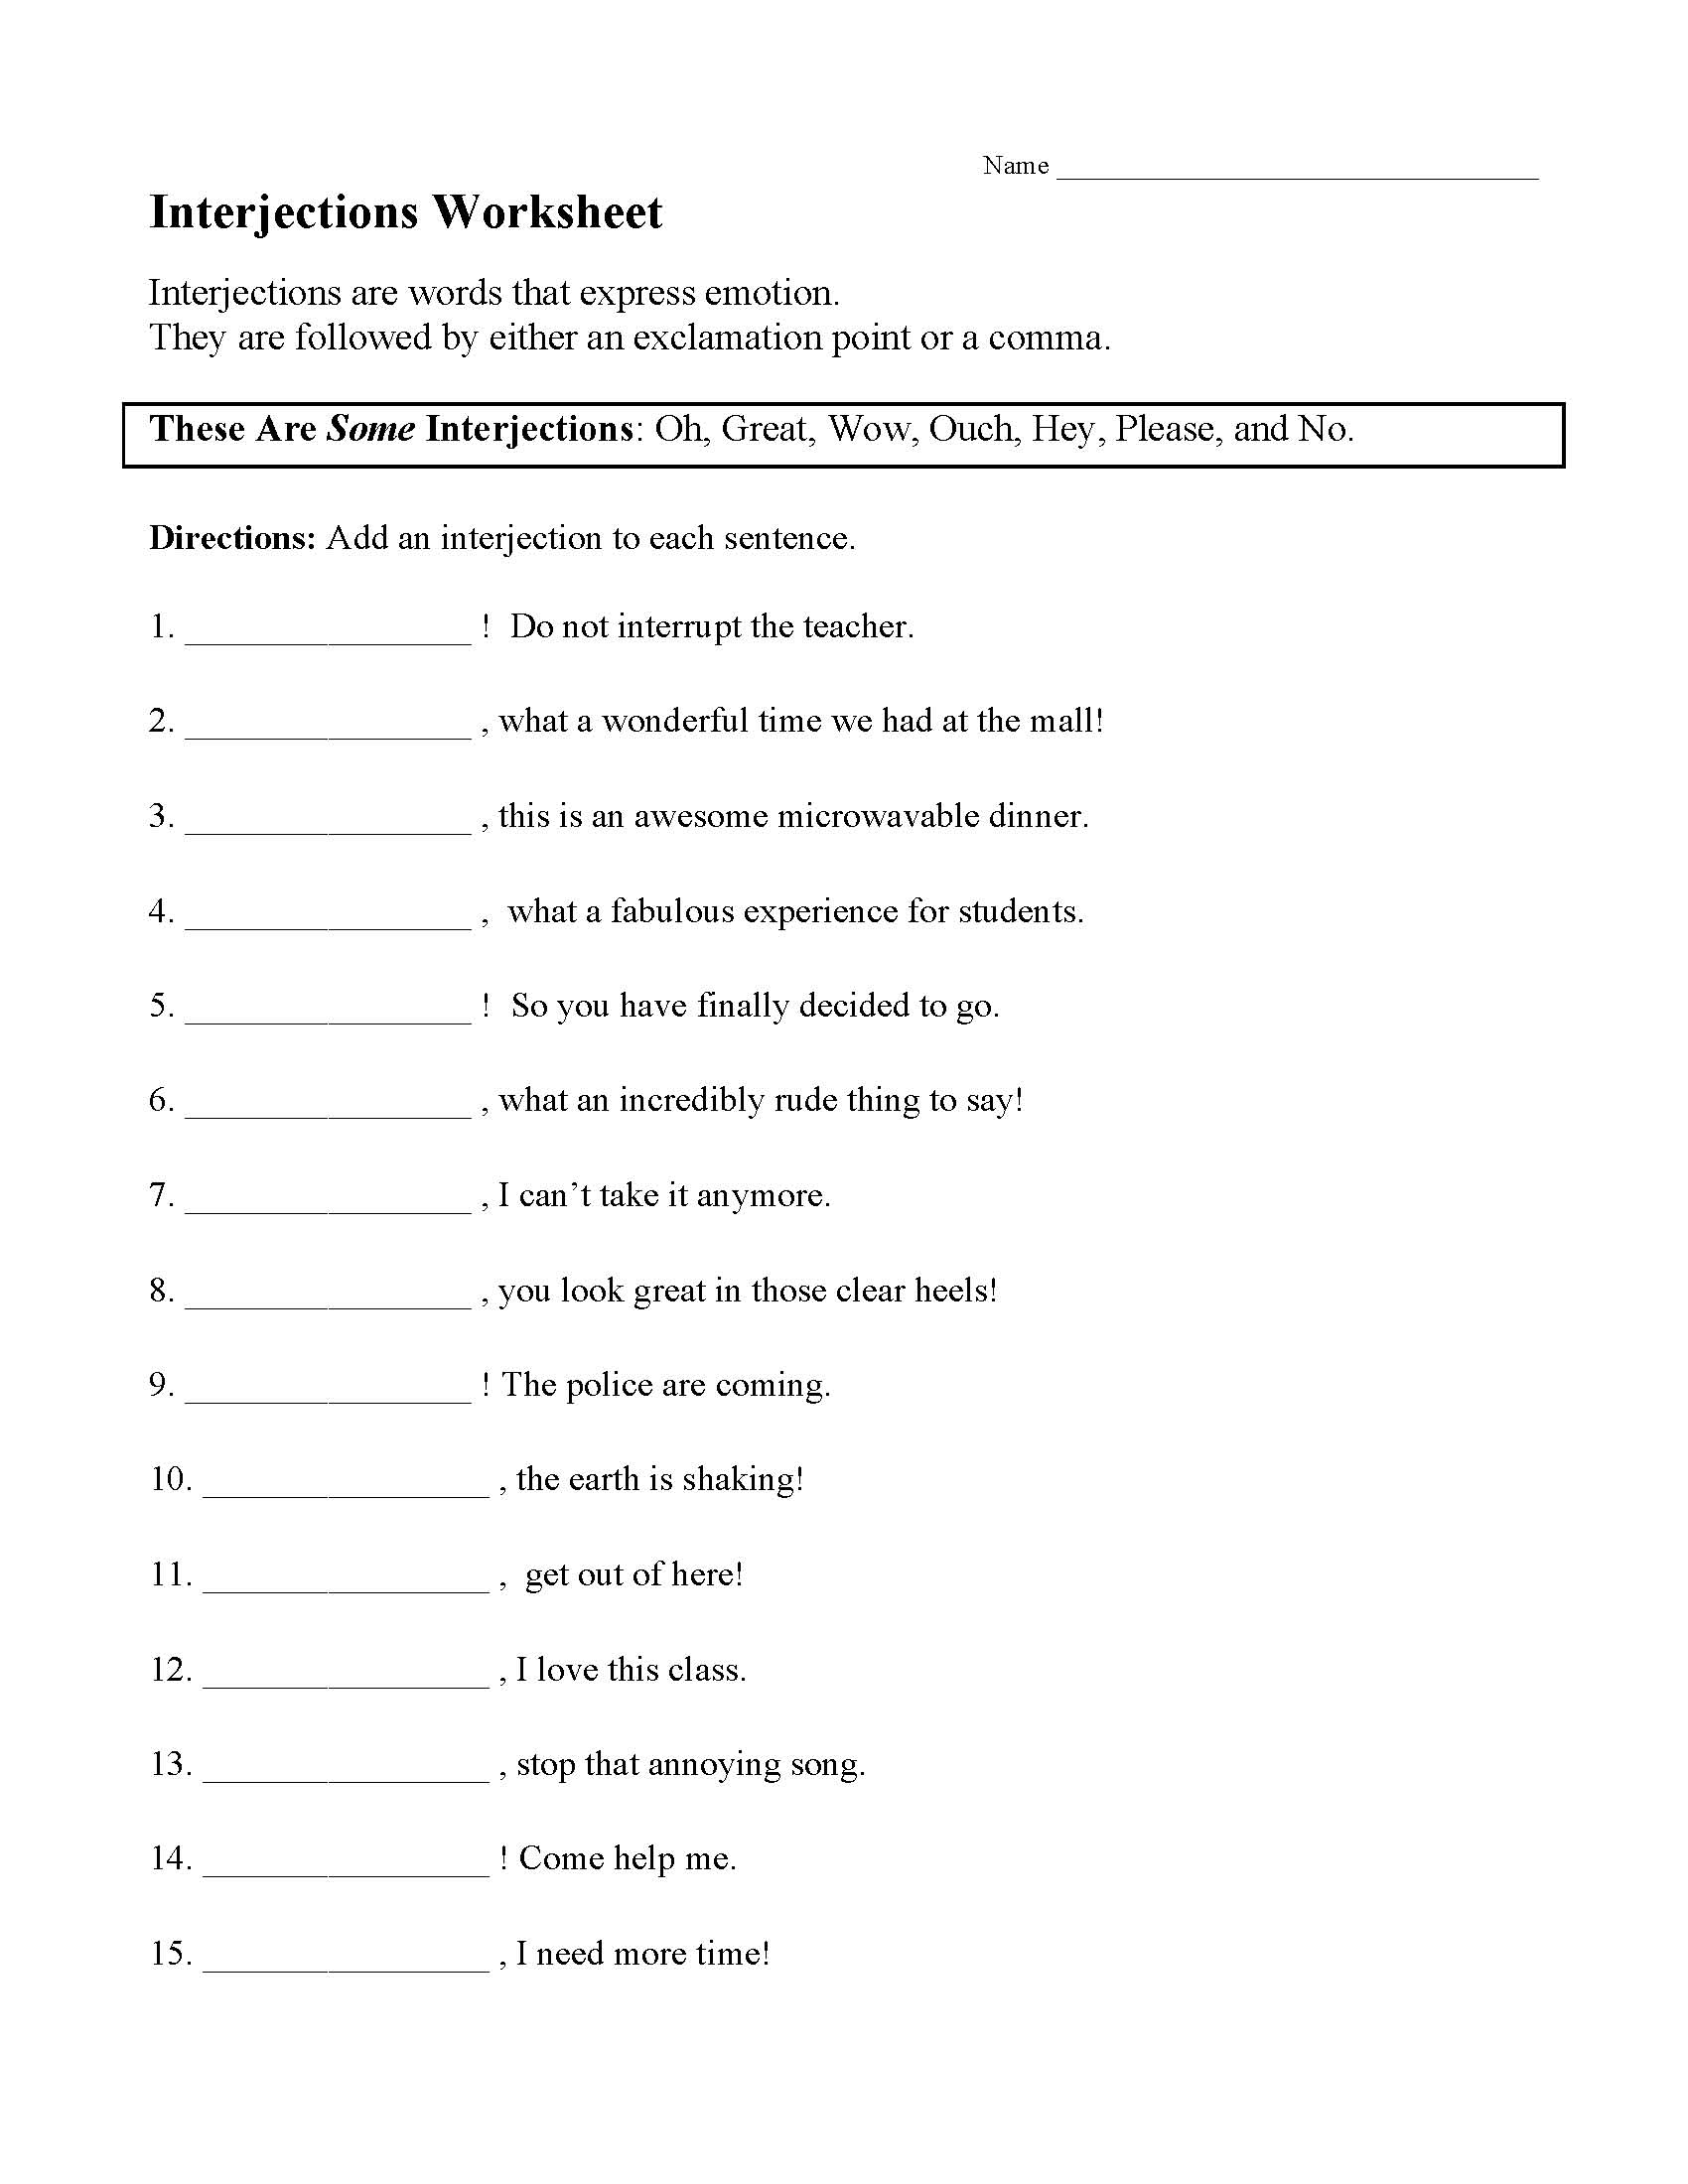 This is a preview image of the Interjections Worksheet.